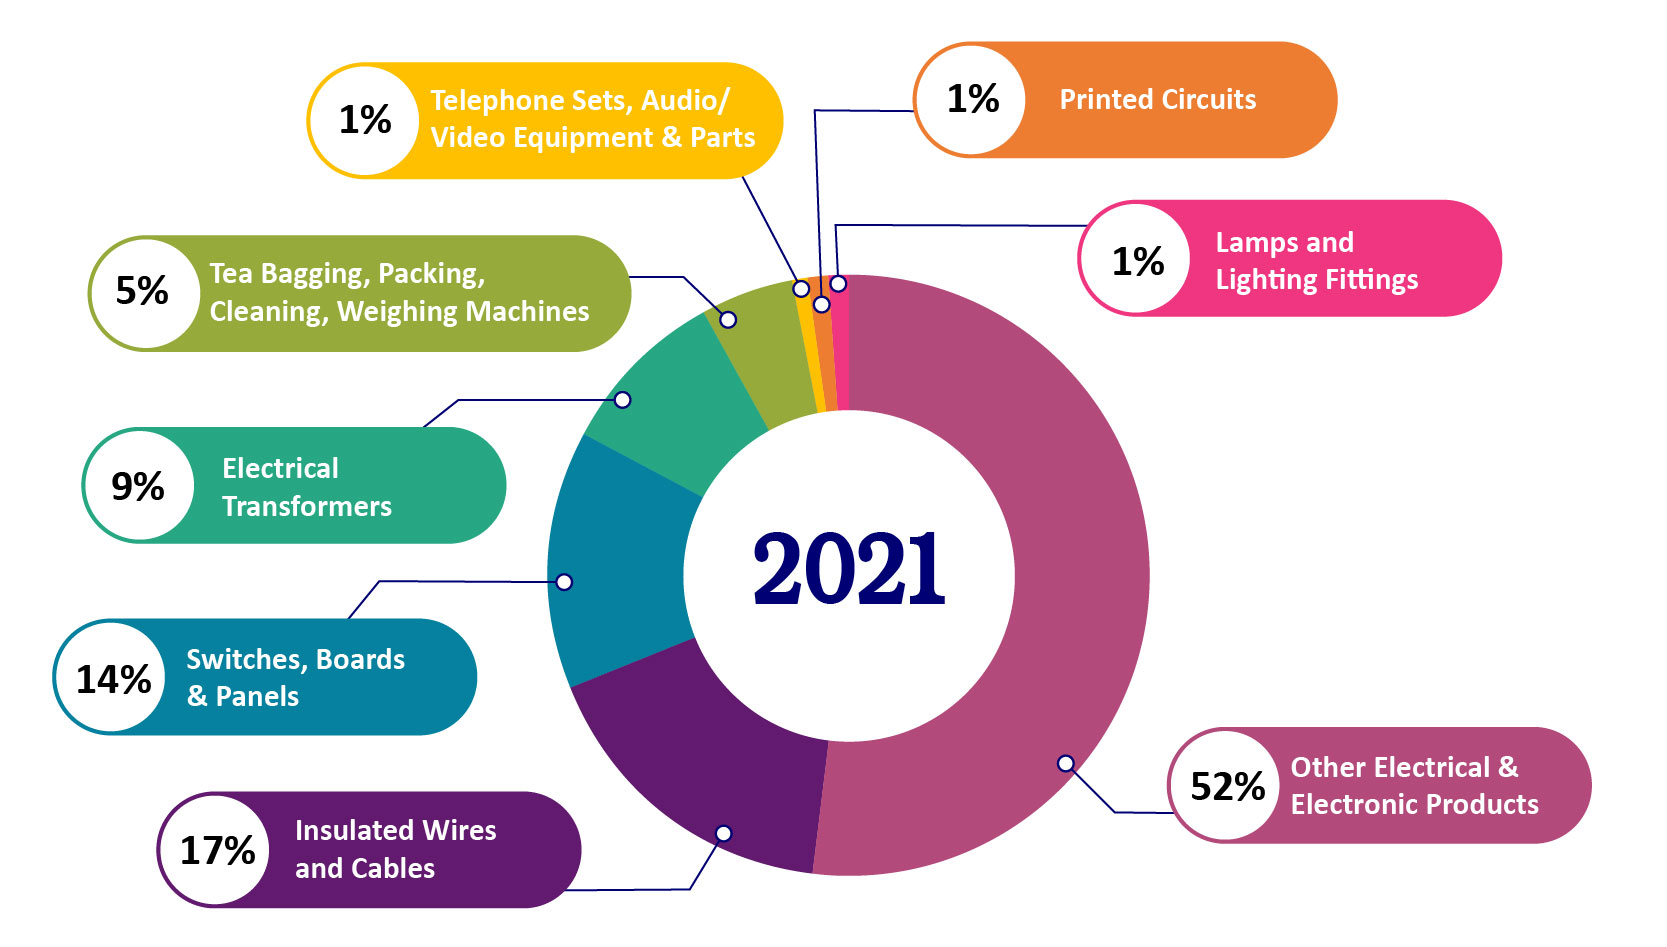 Export Performnace 2021 - Electrical & Electronic